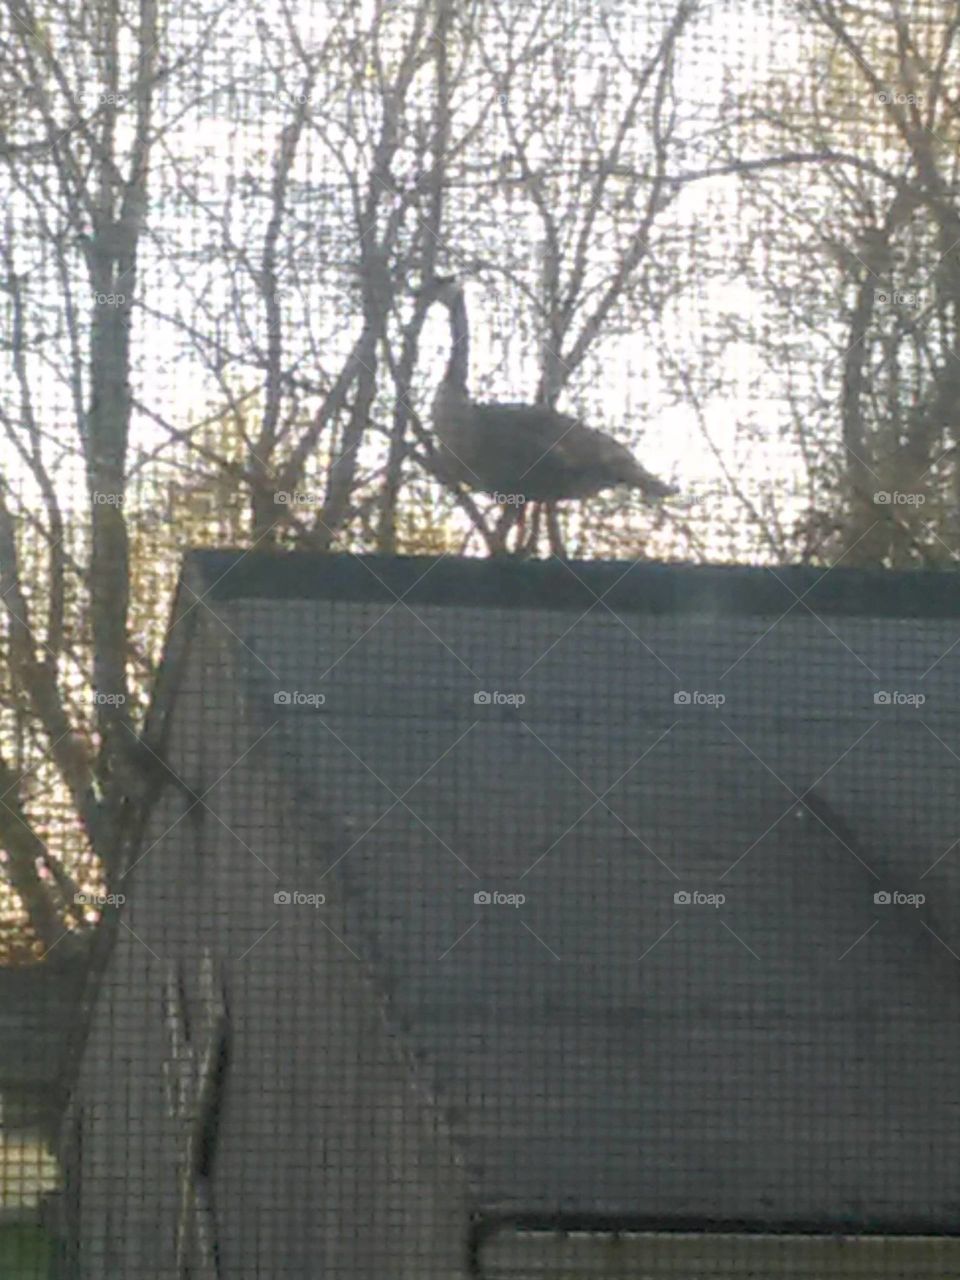 Goose on a roof